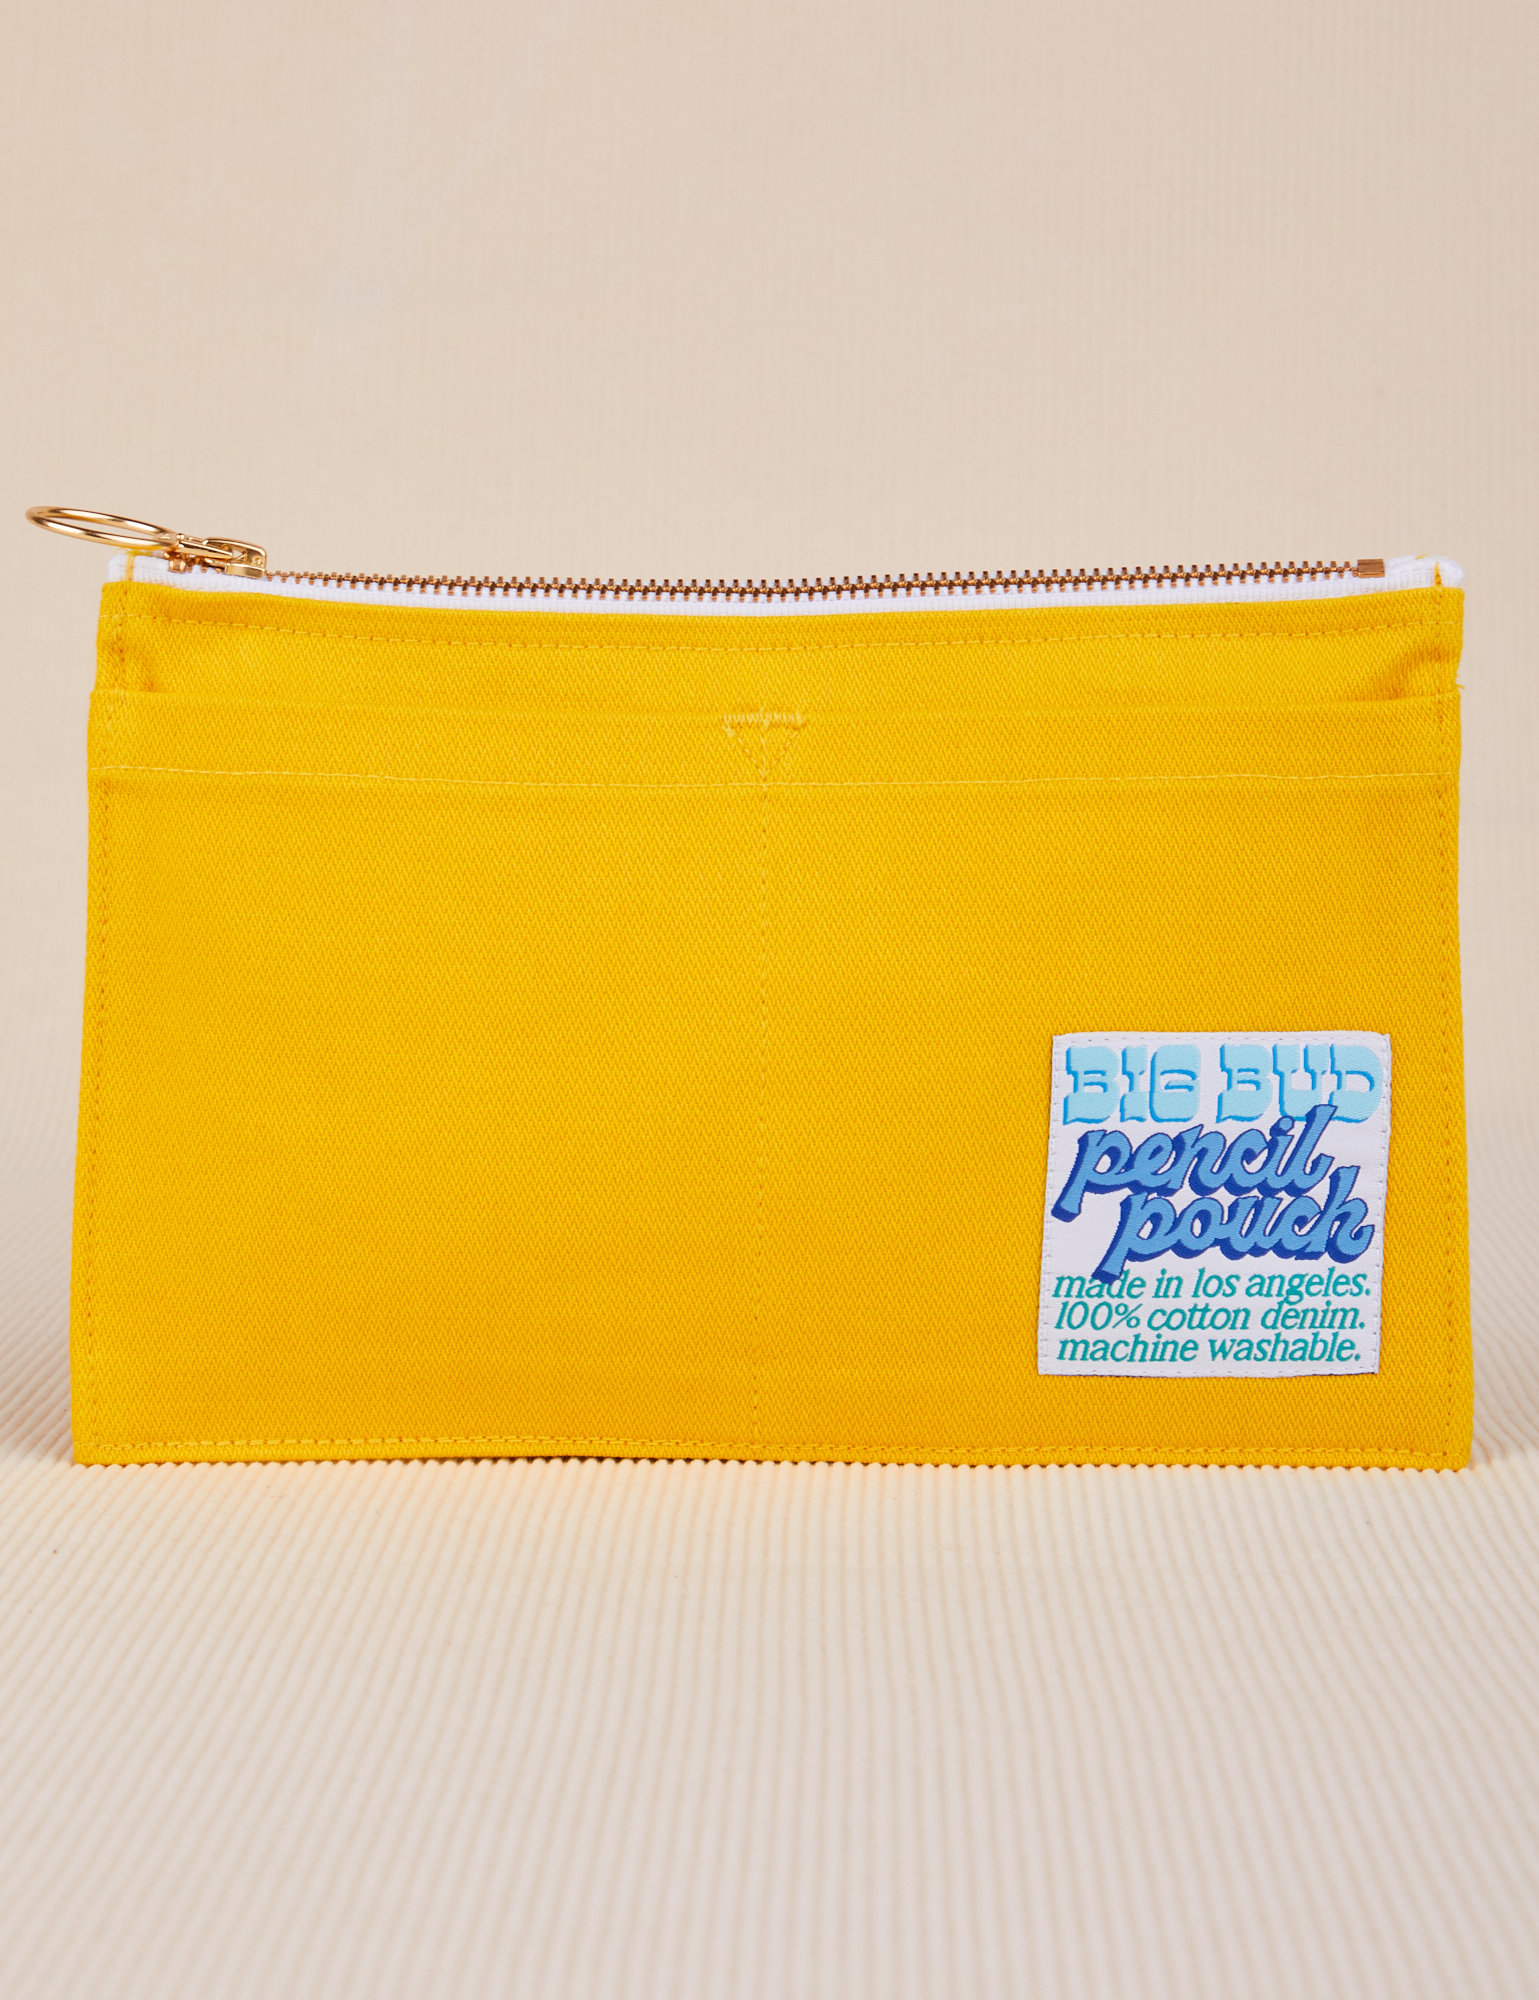 Pencil Pouch in Golden Yellow